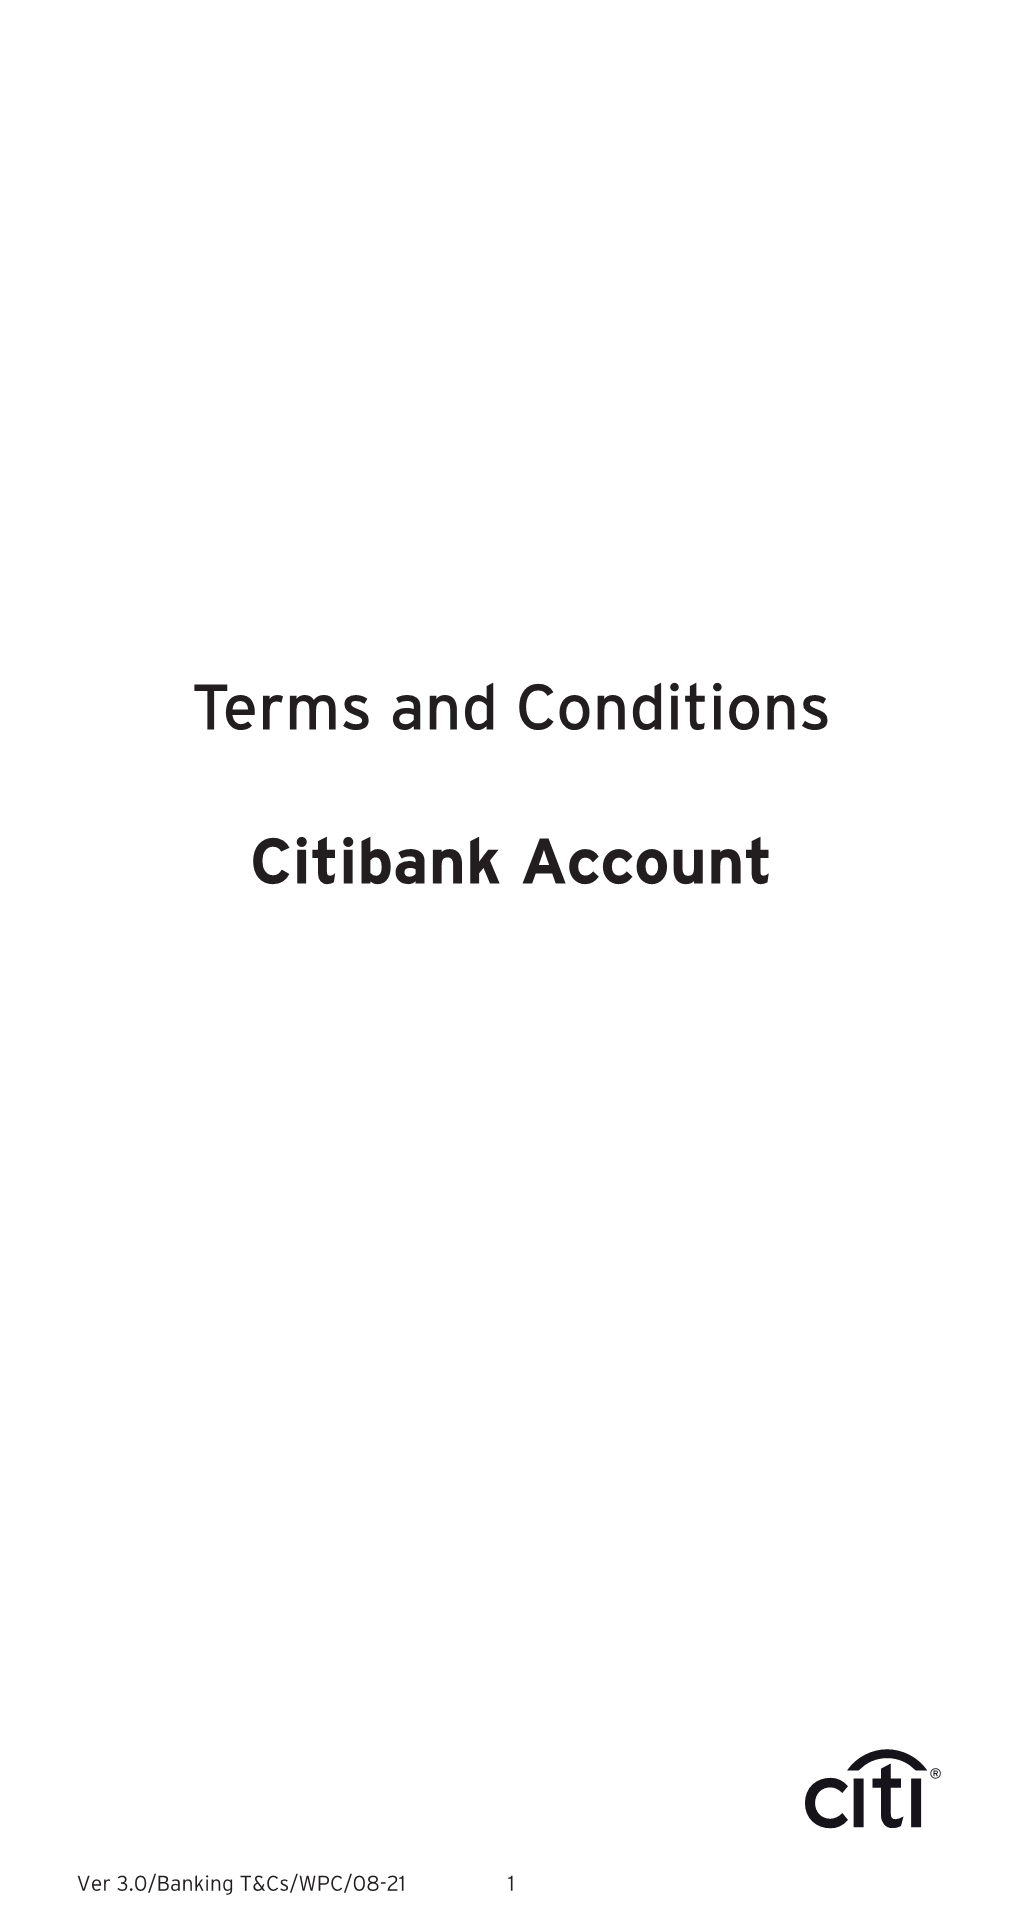 Citibank Account Terms and Conditions